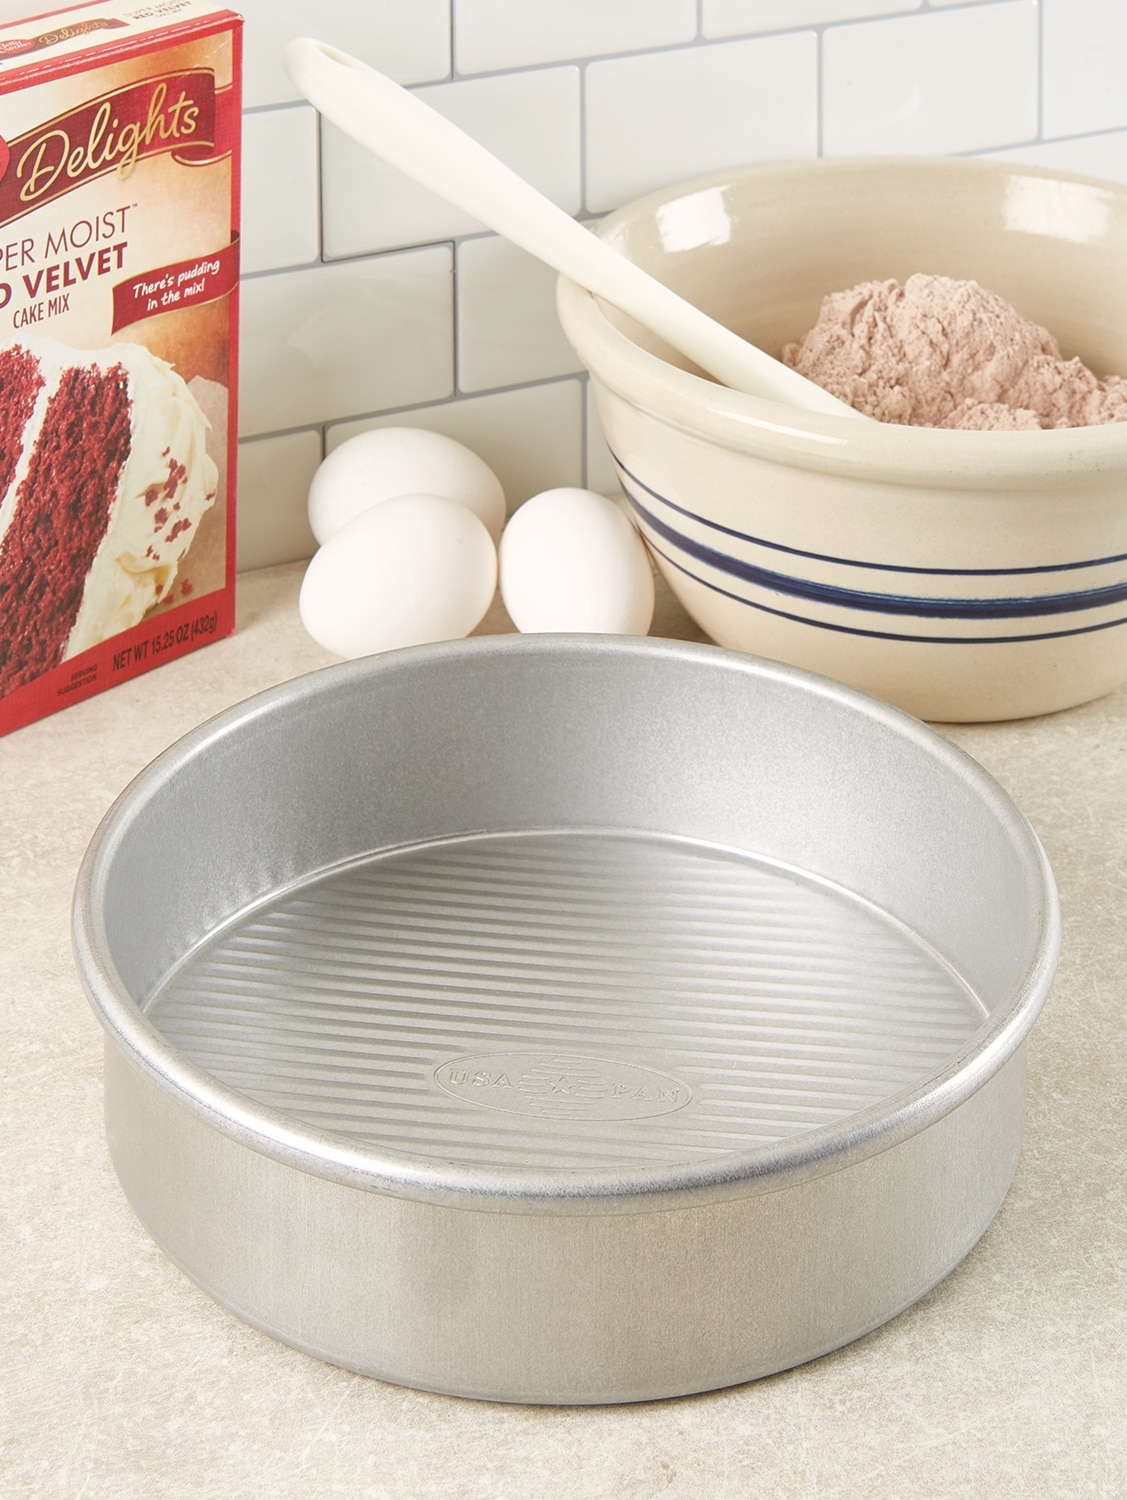 8-inch Round Cake Pan and Nonstick Cheesecake Pan with Silicone Bottom Baking Pans Cakes Set by PRO-MARKAS Cake Pan 